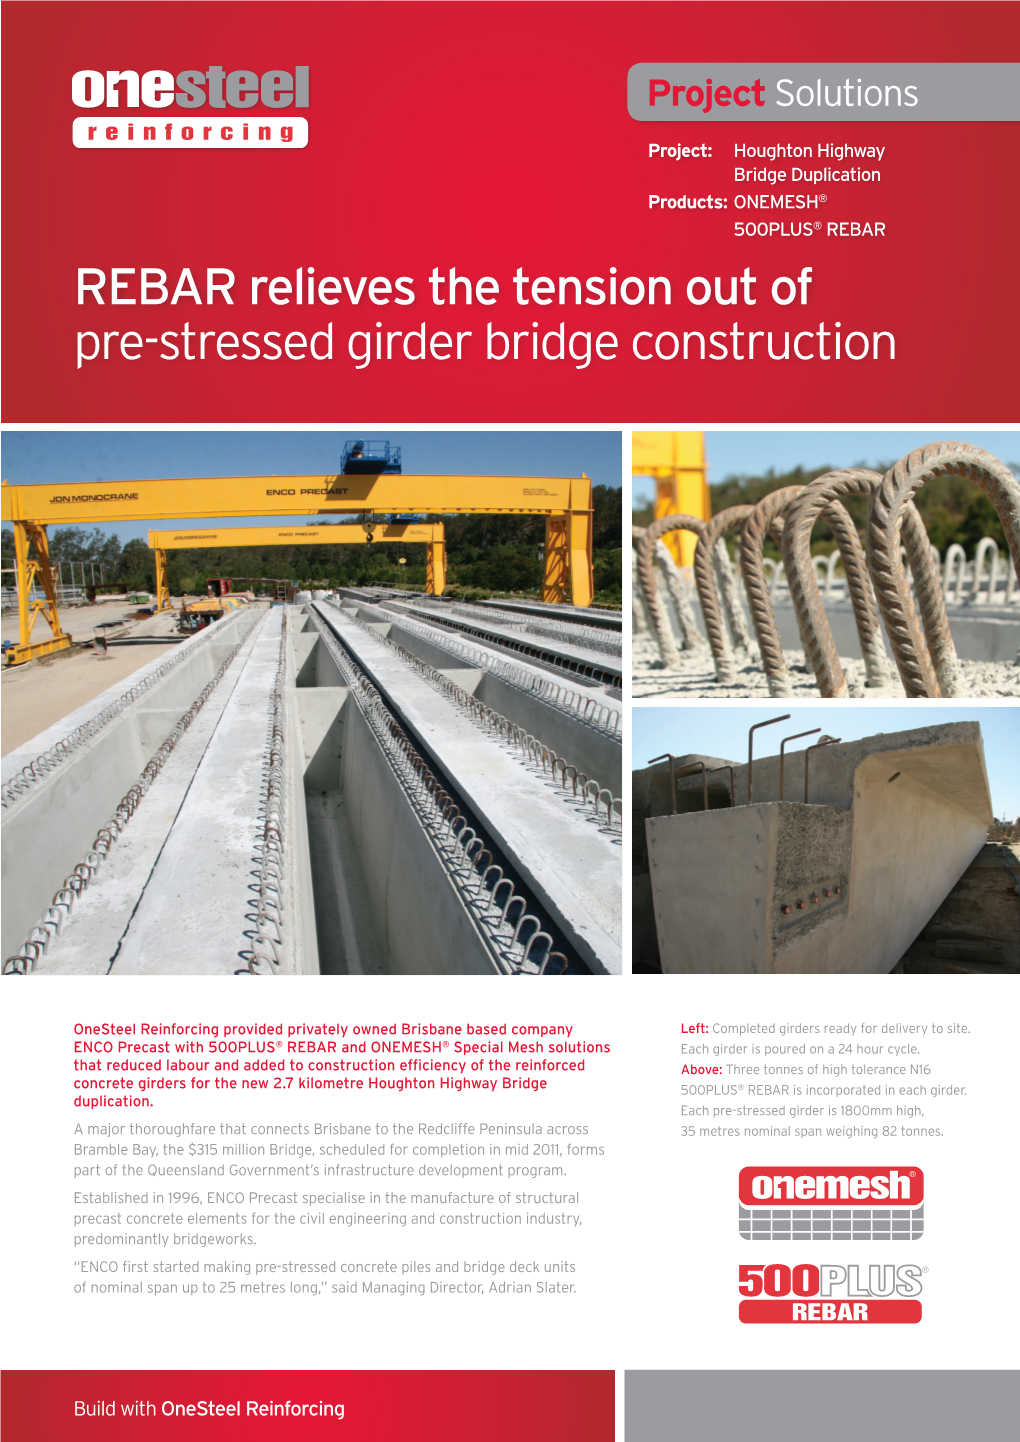 REBAR Relieves the Tension out of Pre-Stressed Girder Bridge